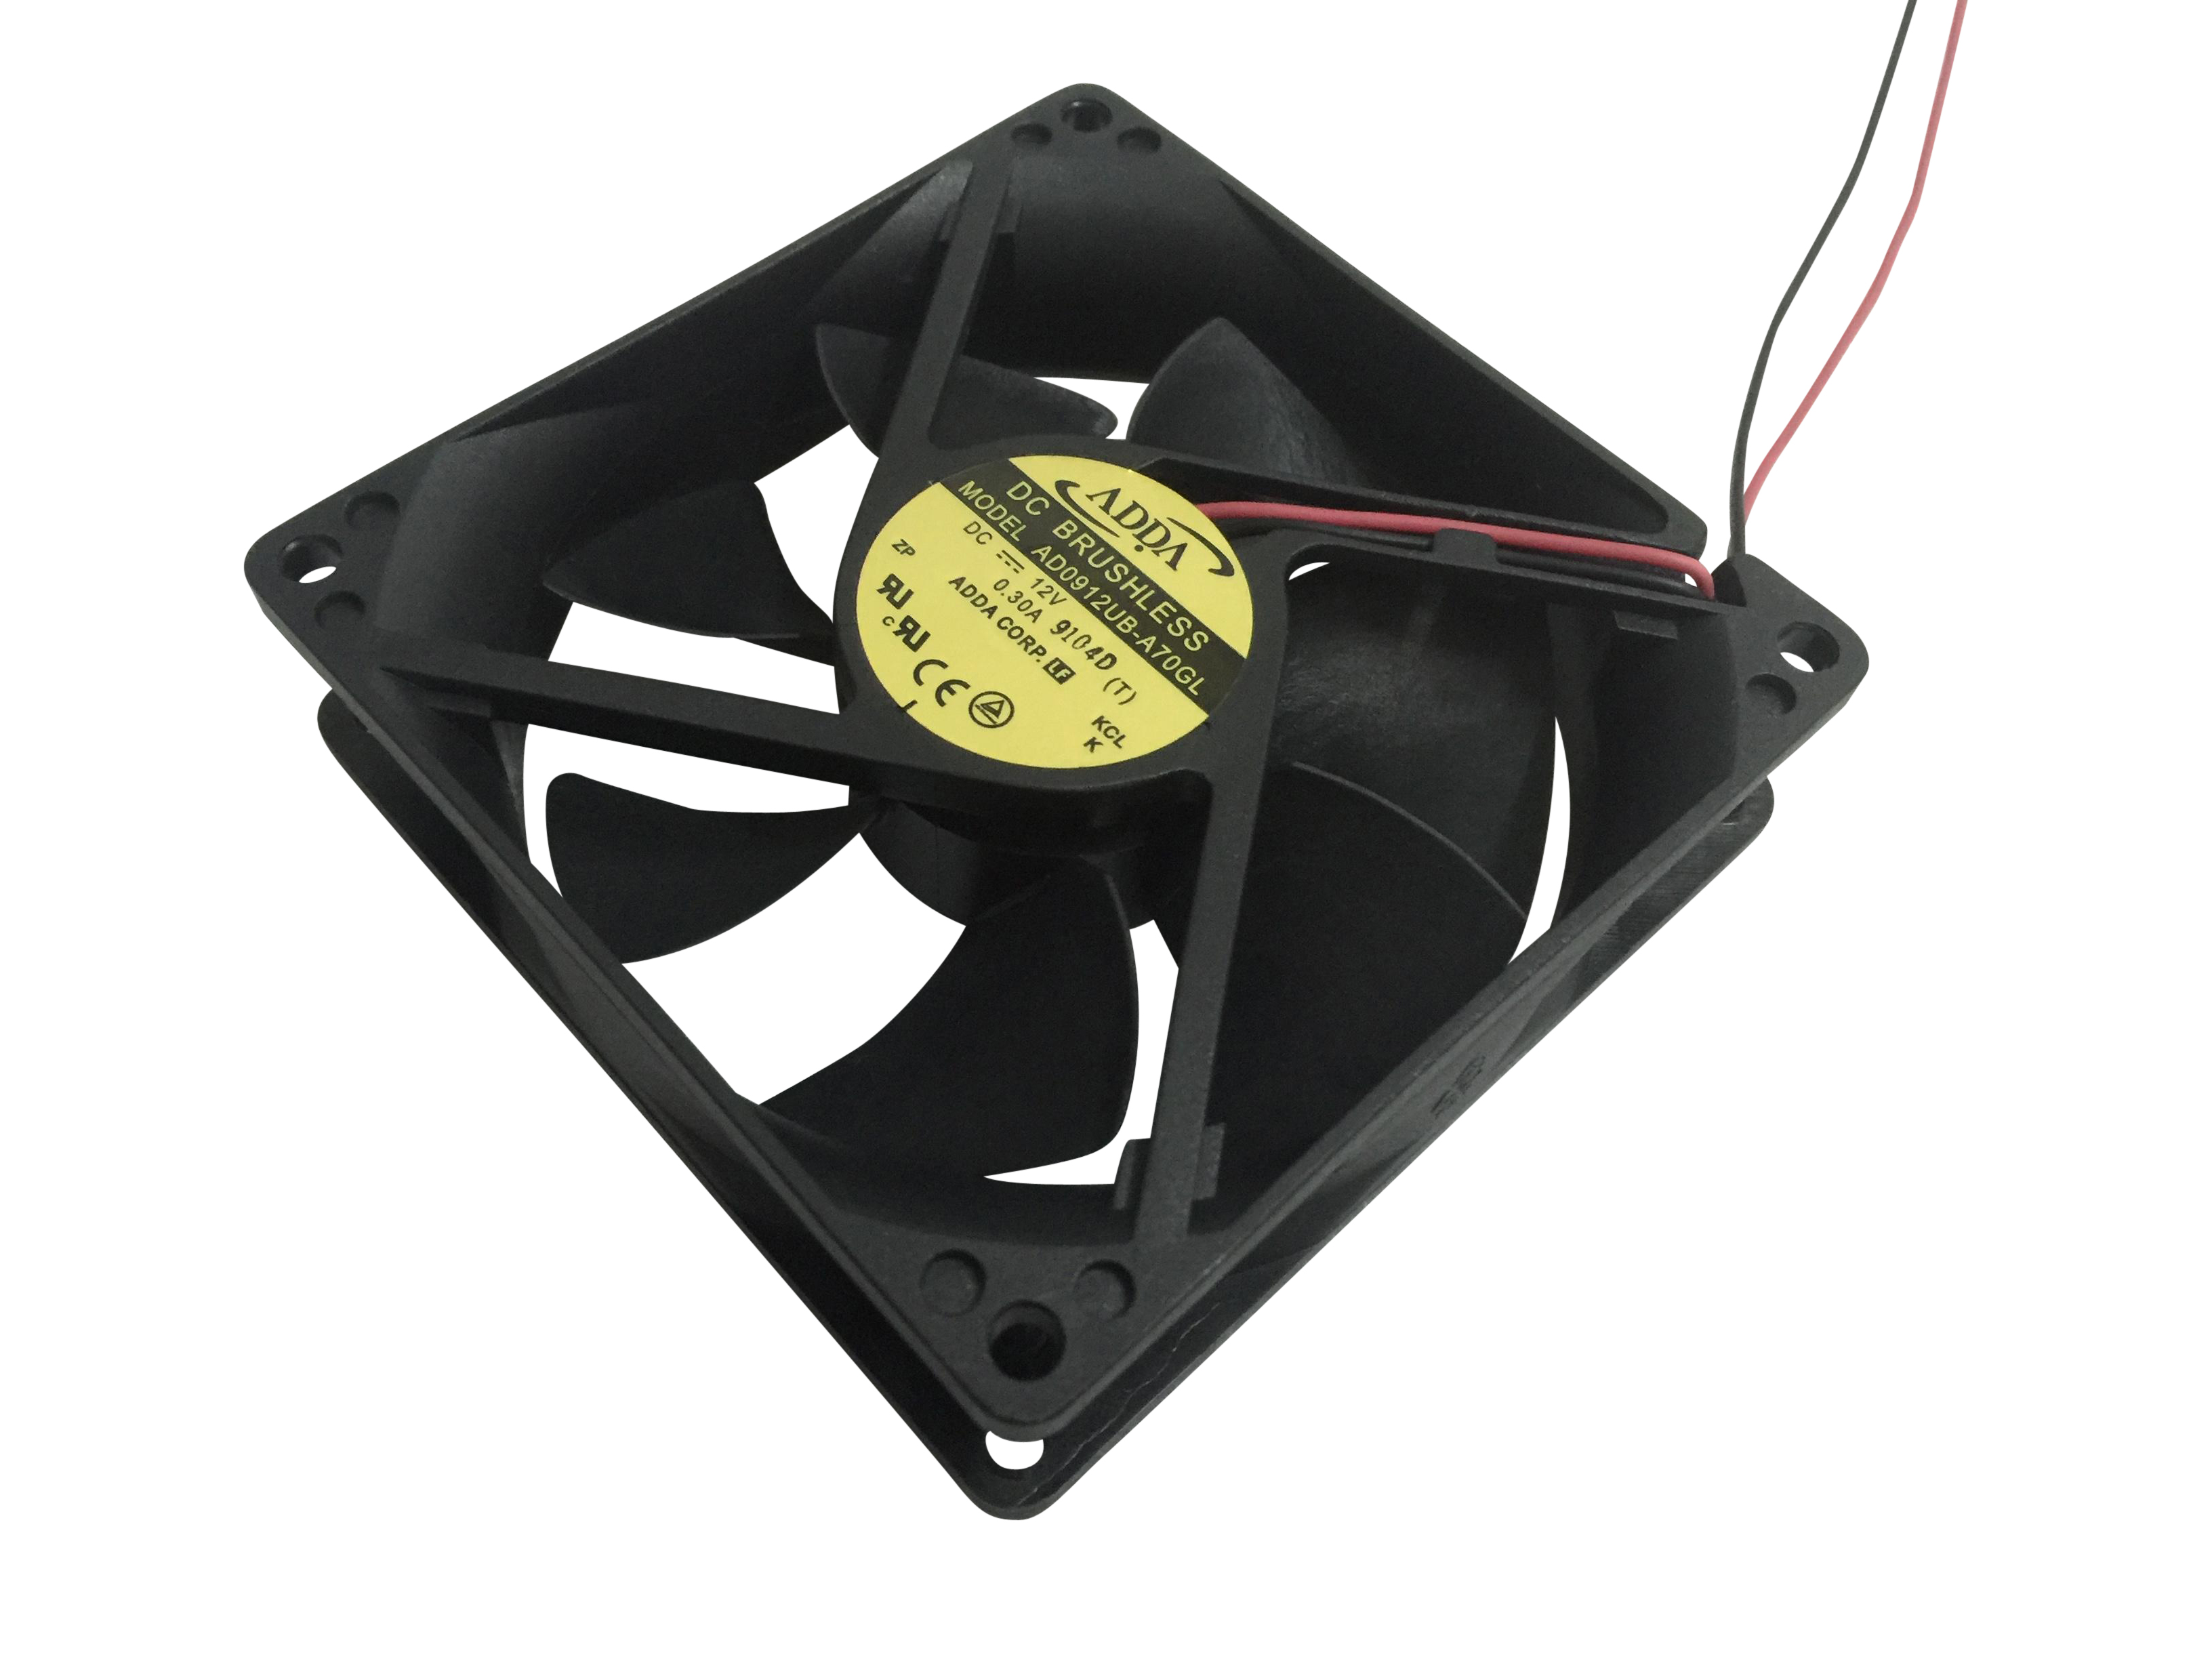 Jubilee AD0912UB-A70GL DC12V 0.30A Gale volume double ball cooling fan 9CM